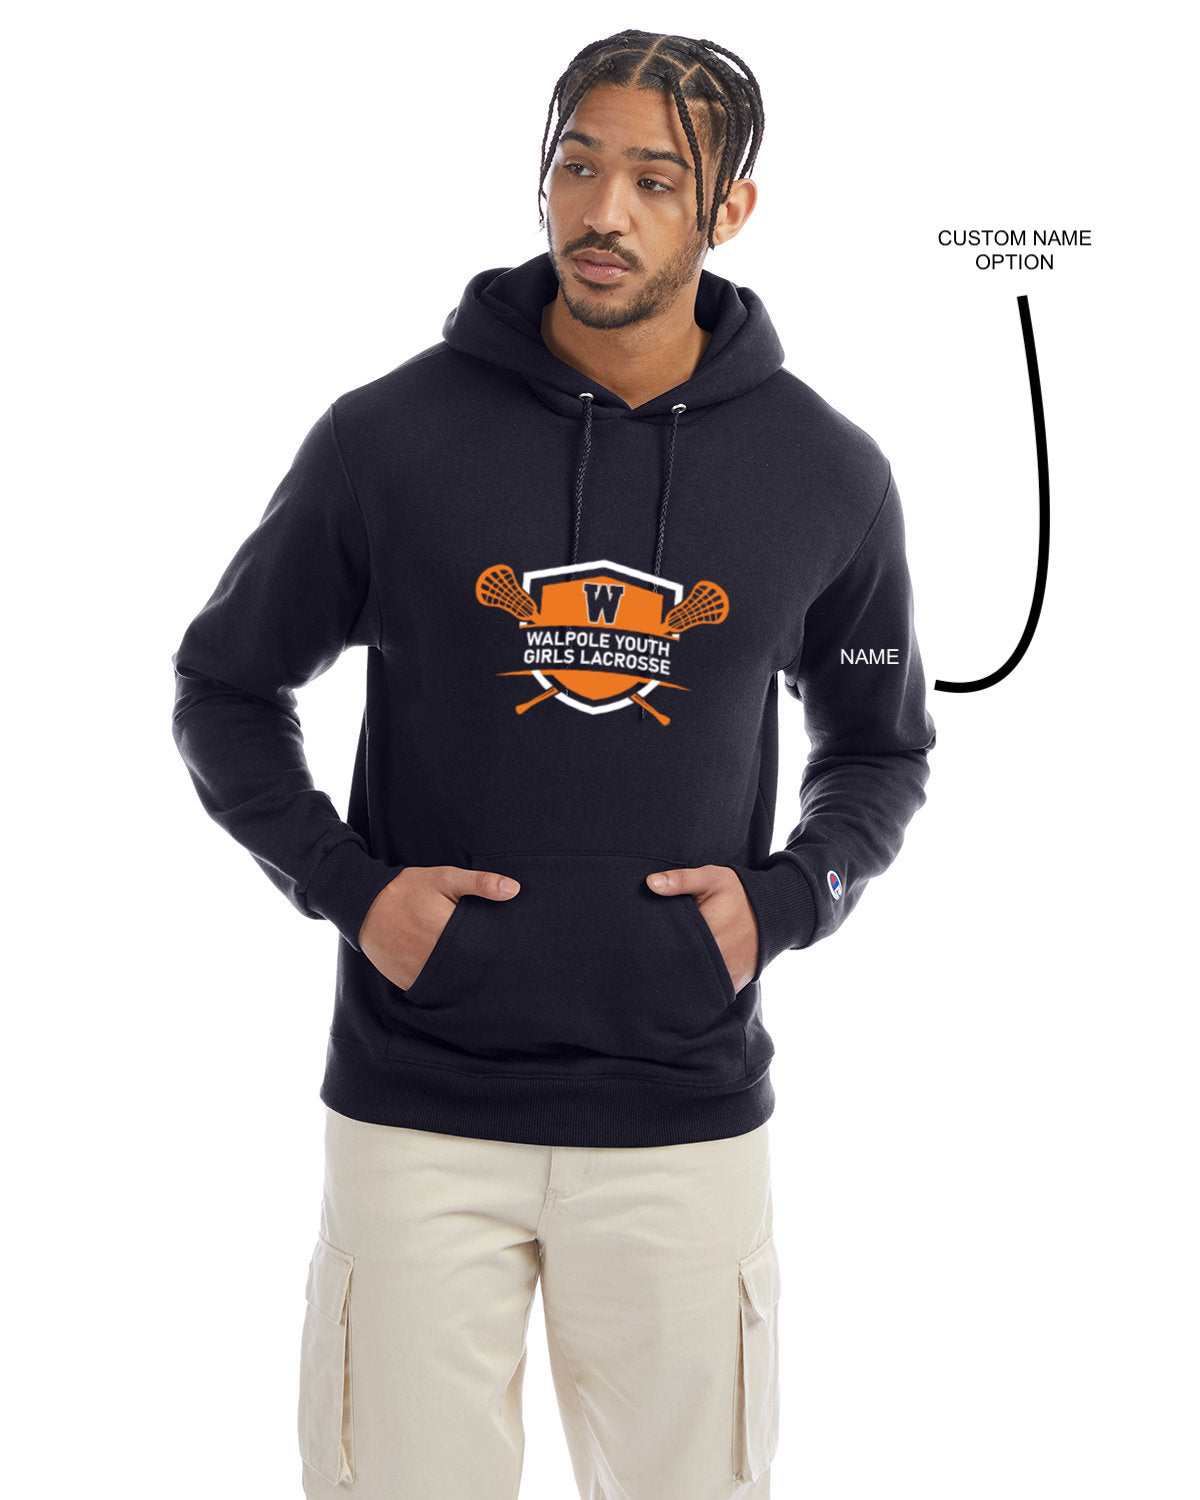 Walpole Youth Girls Lacrosse - Champion® Powerblend® Pullover Hoodie (S700)